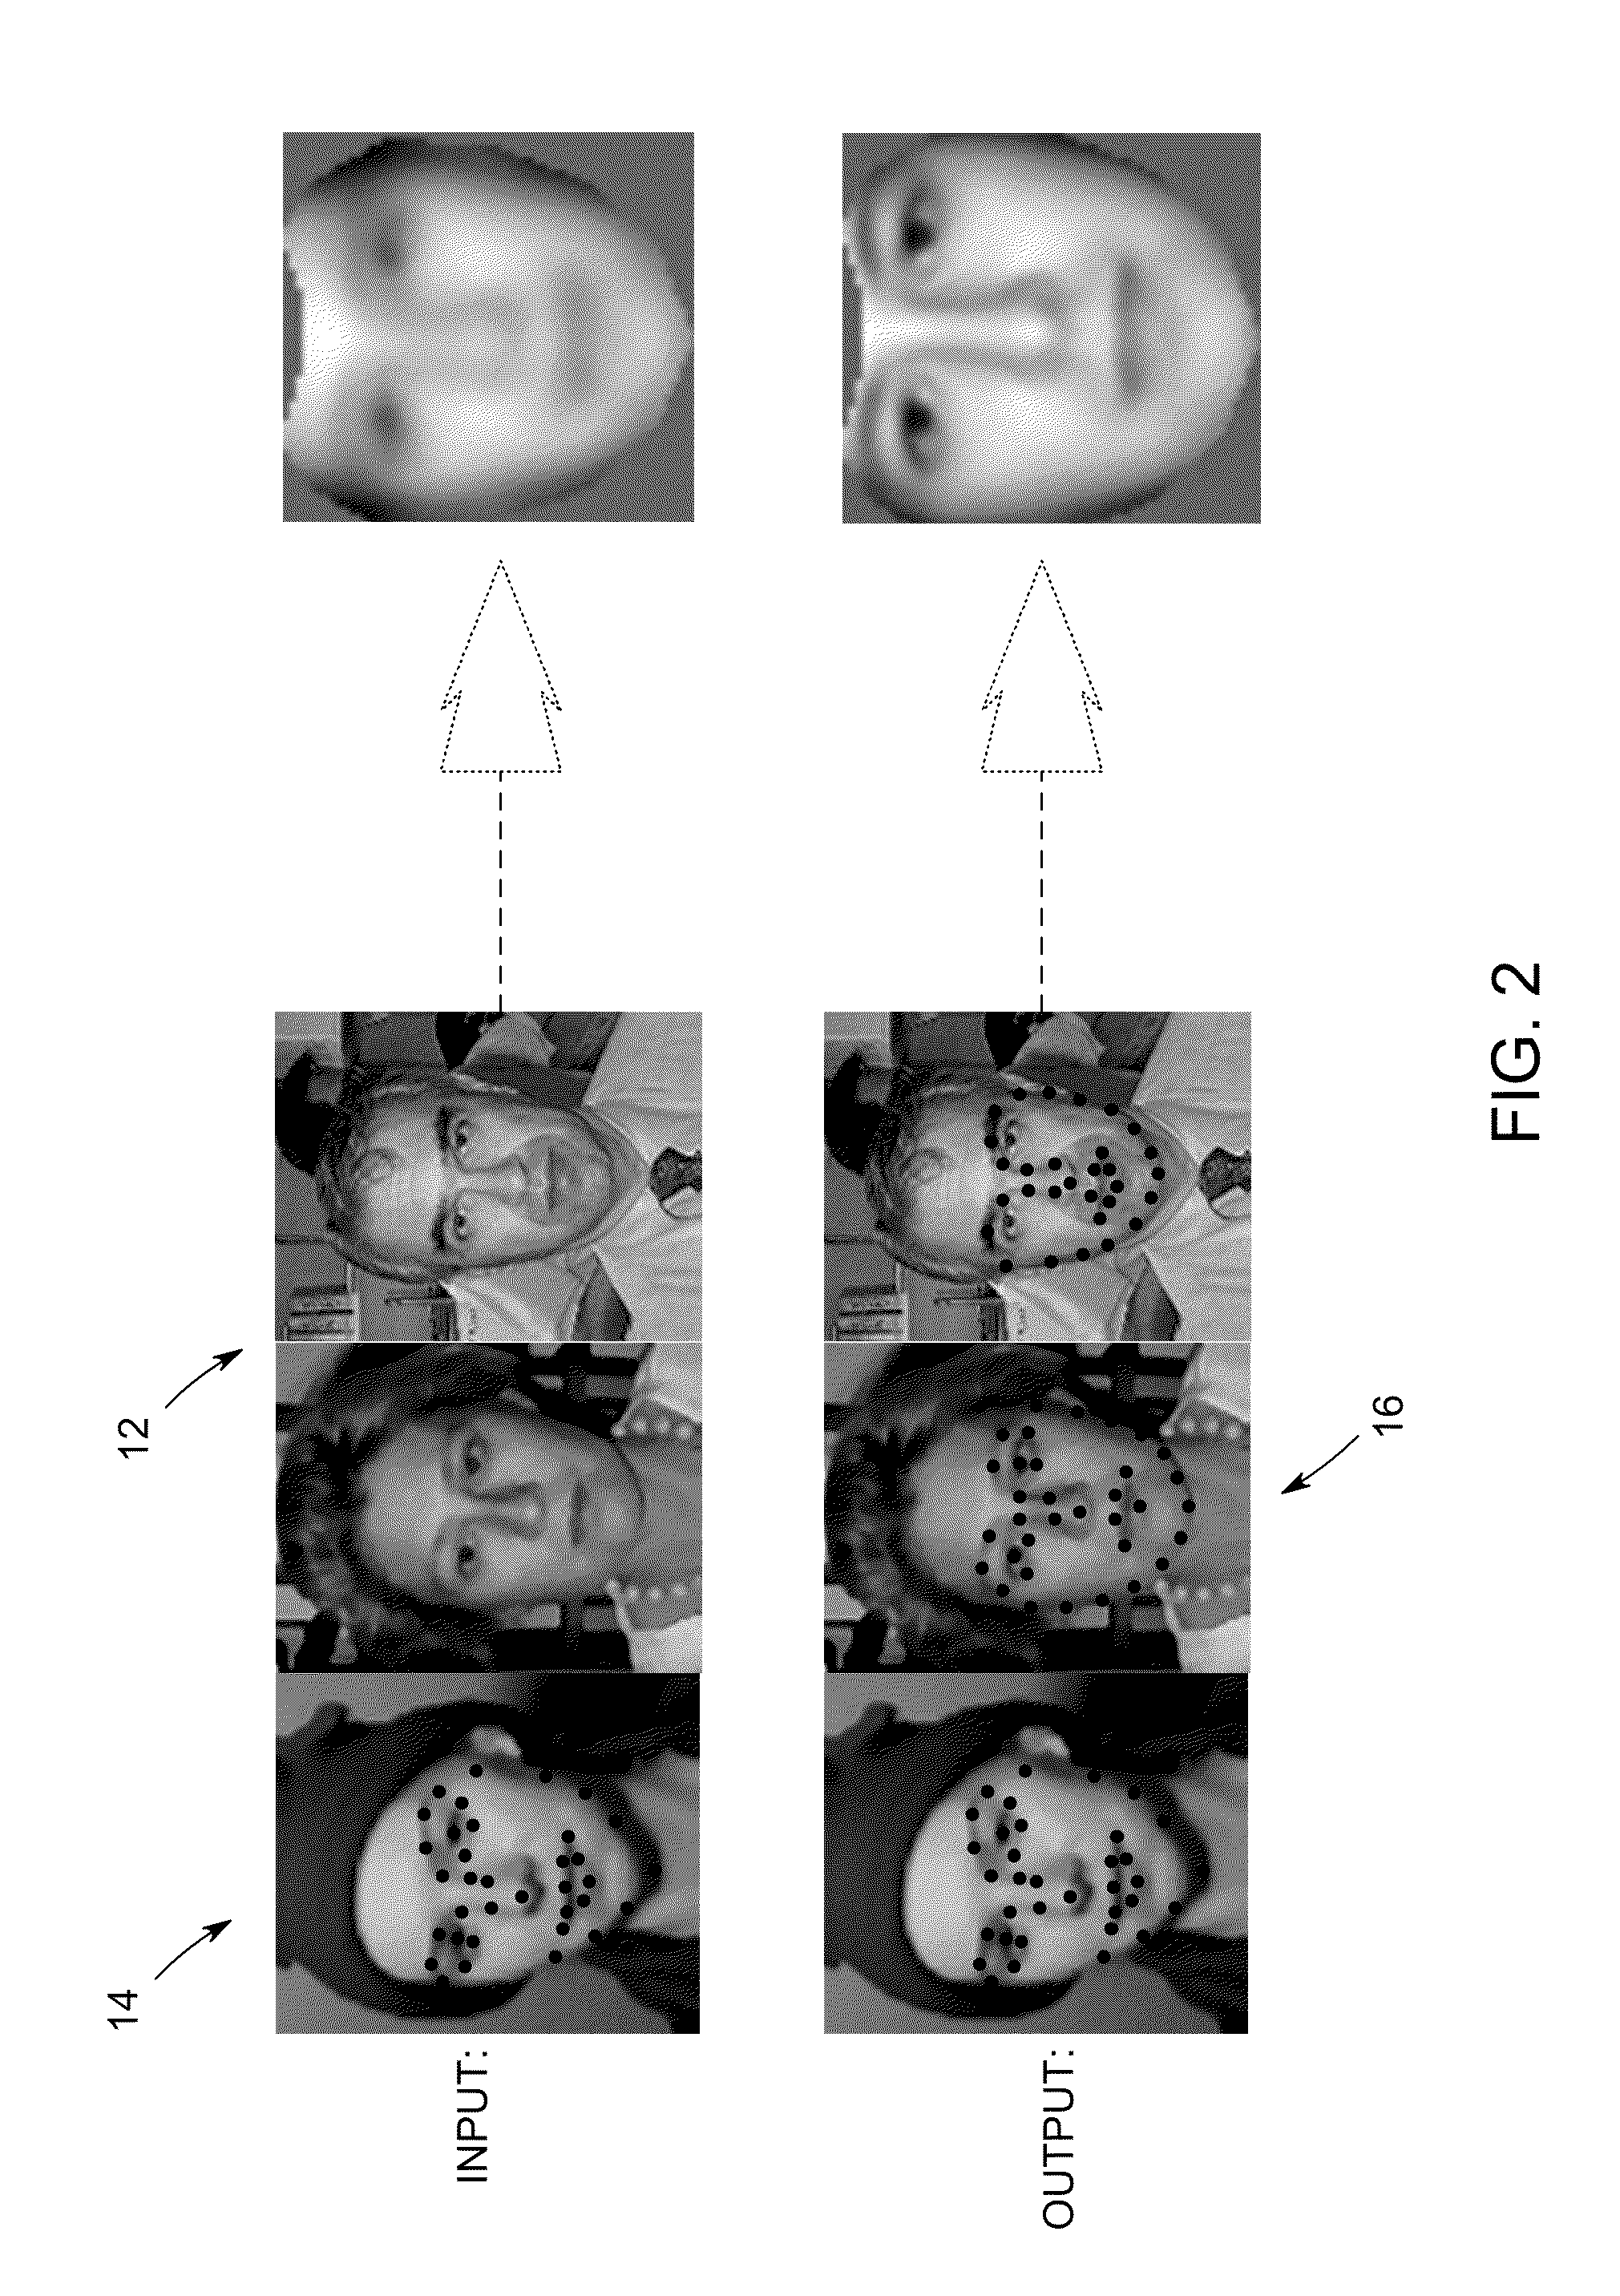 System and method for automatic landmark labeling with minimal supervision